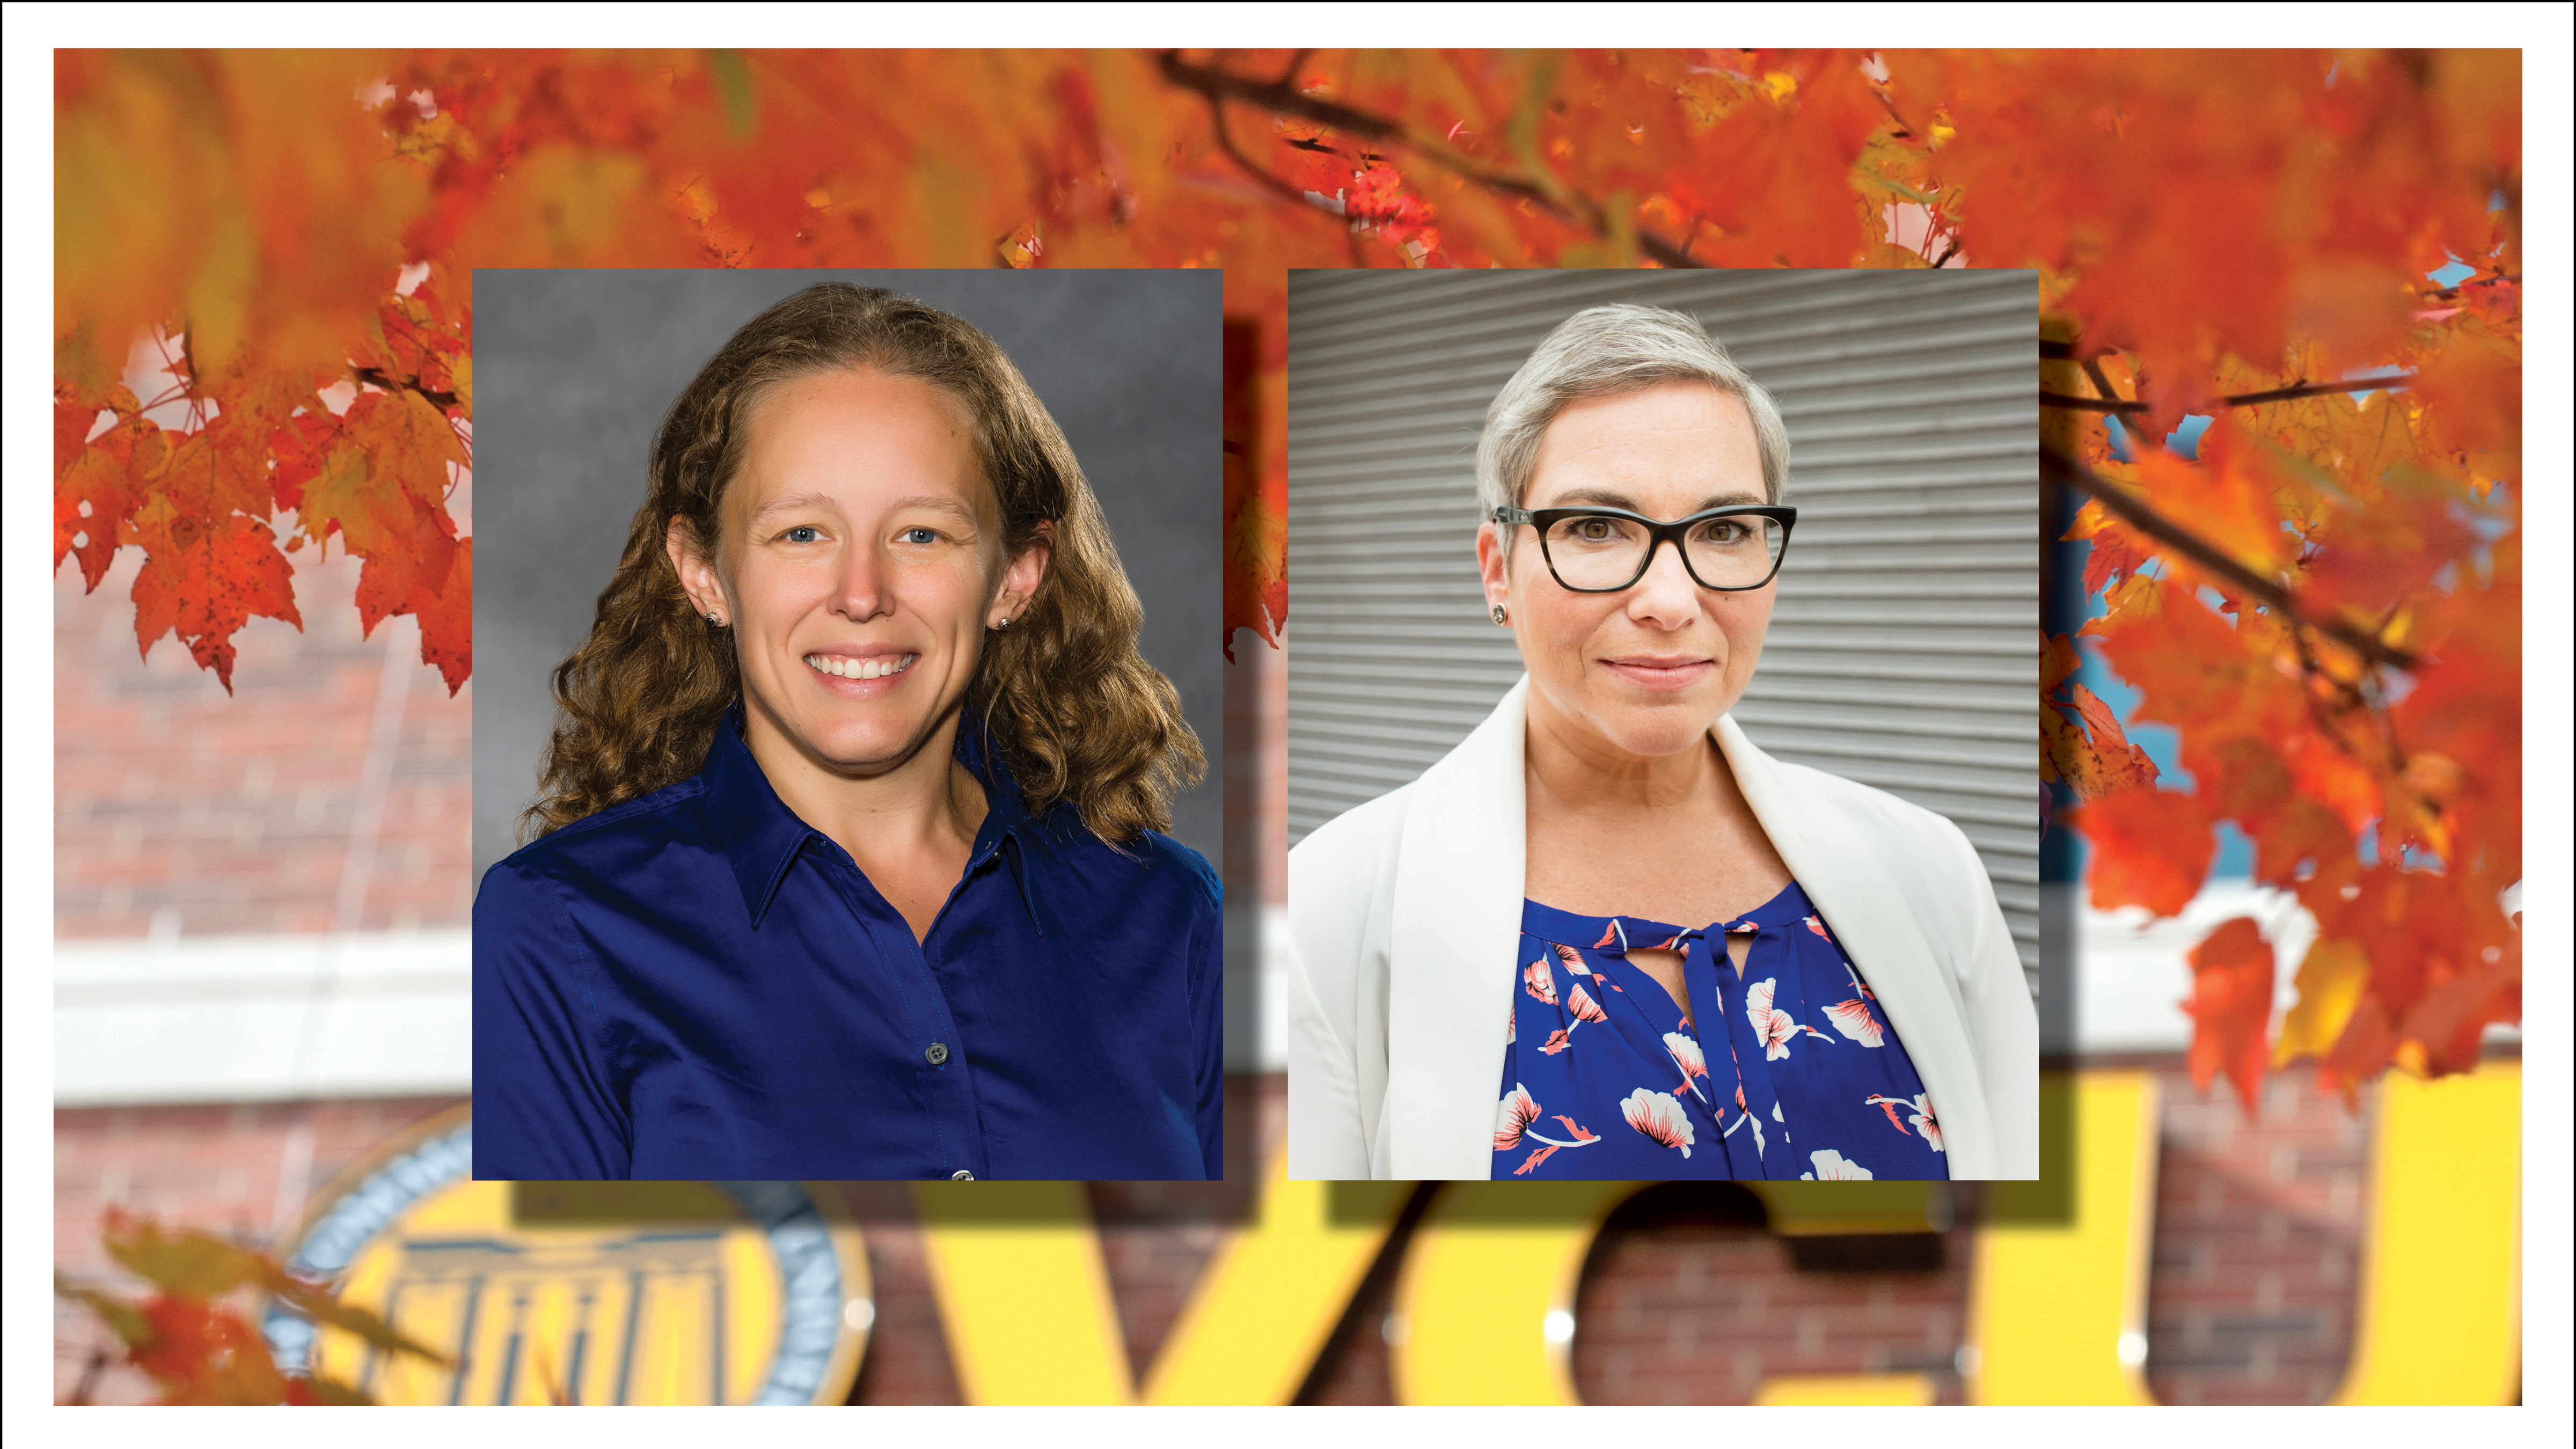 Kate Howell, Ph.D., and Sarah Raskin, Ph.D., are the recipients of the Wilder School's 2017-2018 Faculty Small Grant Awards.